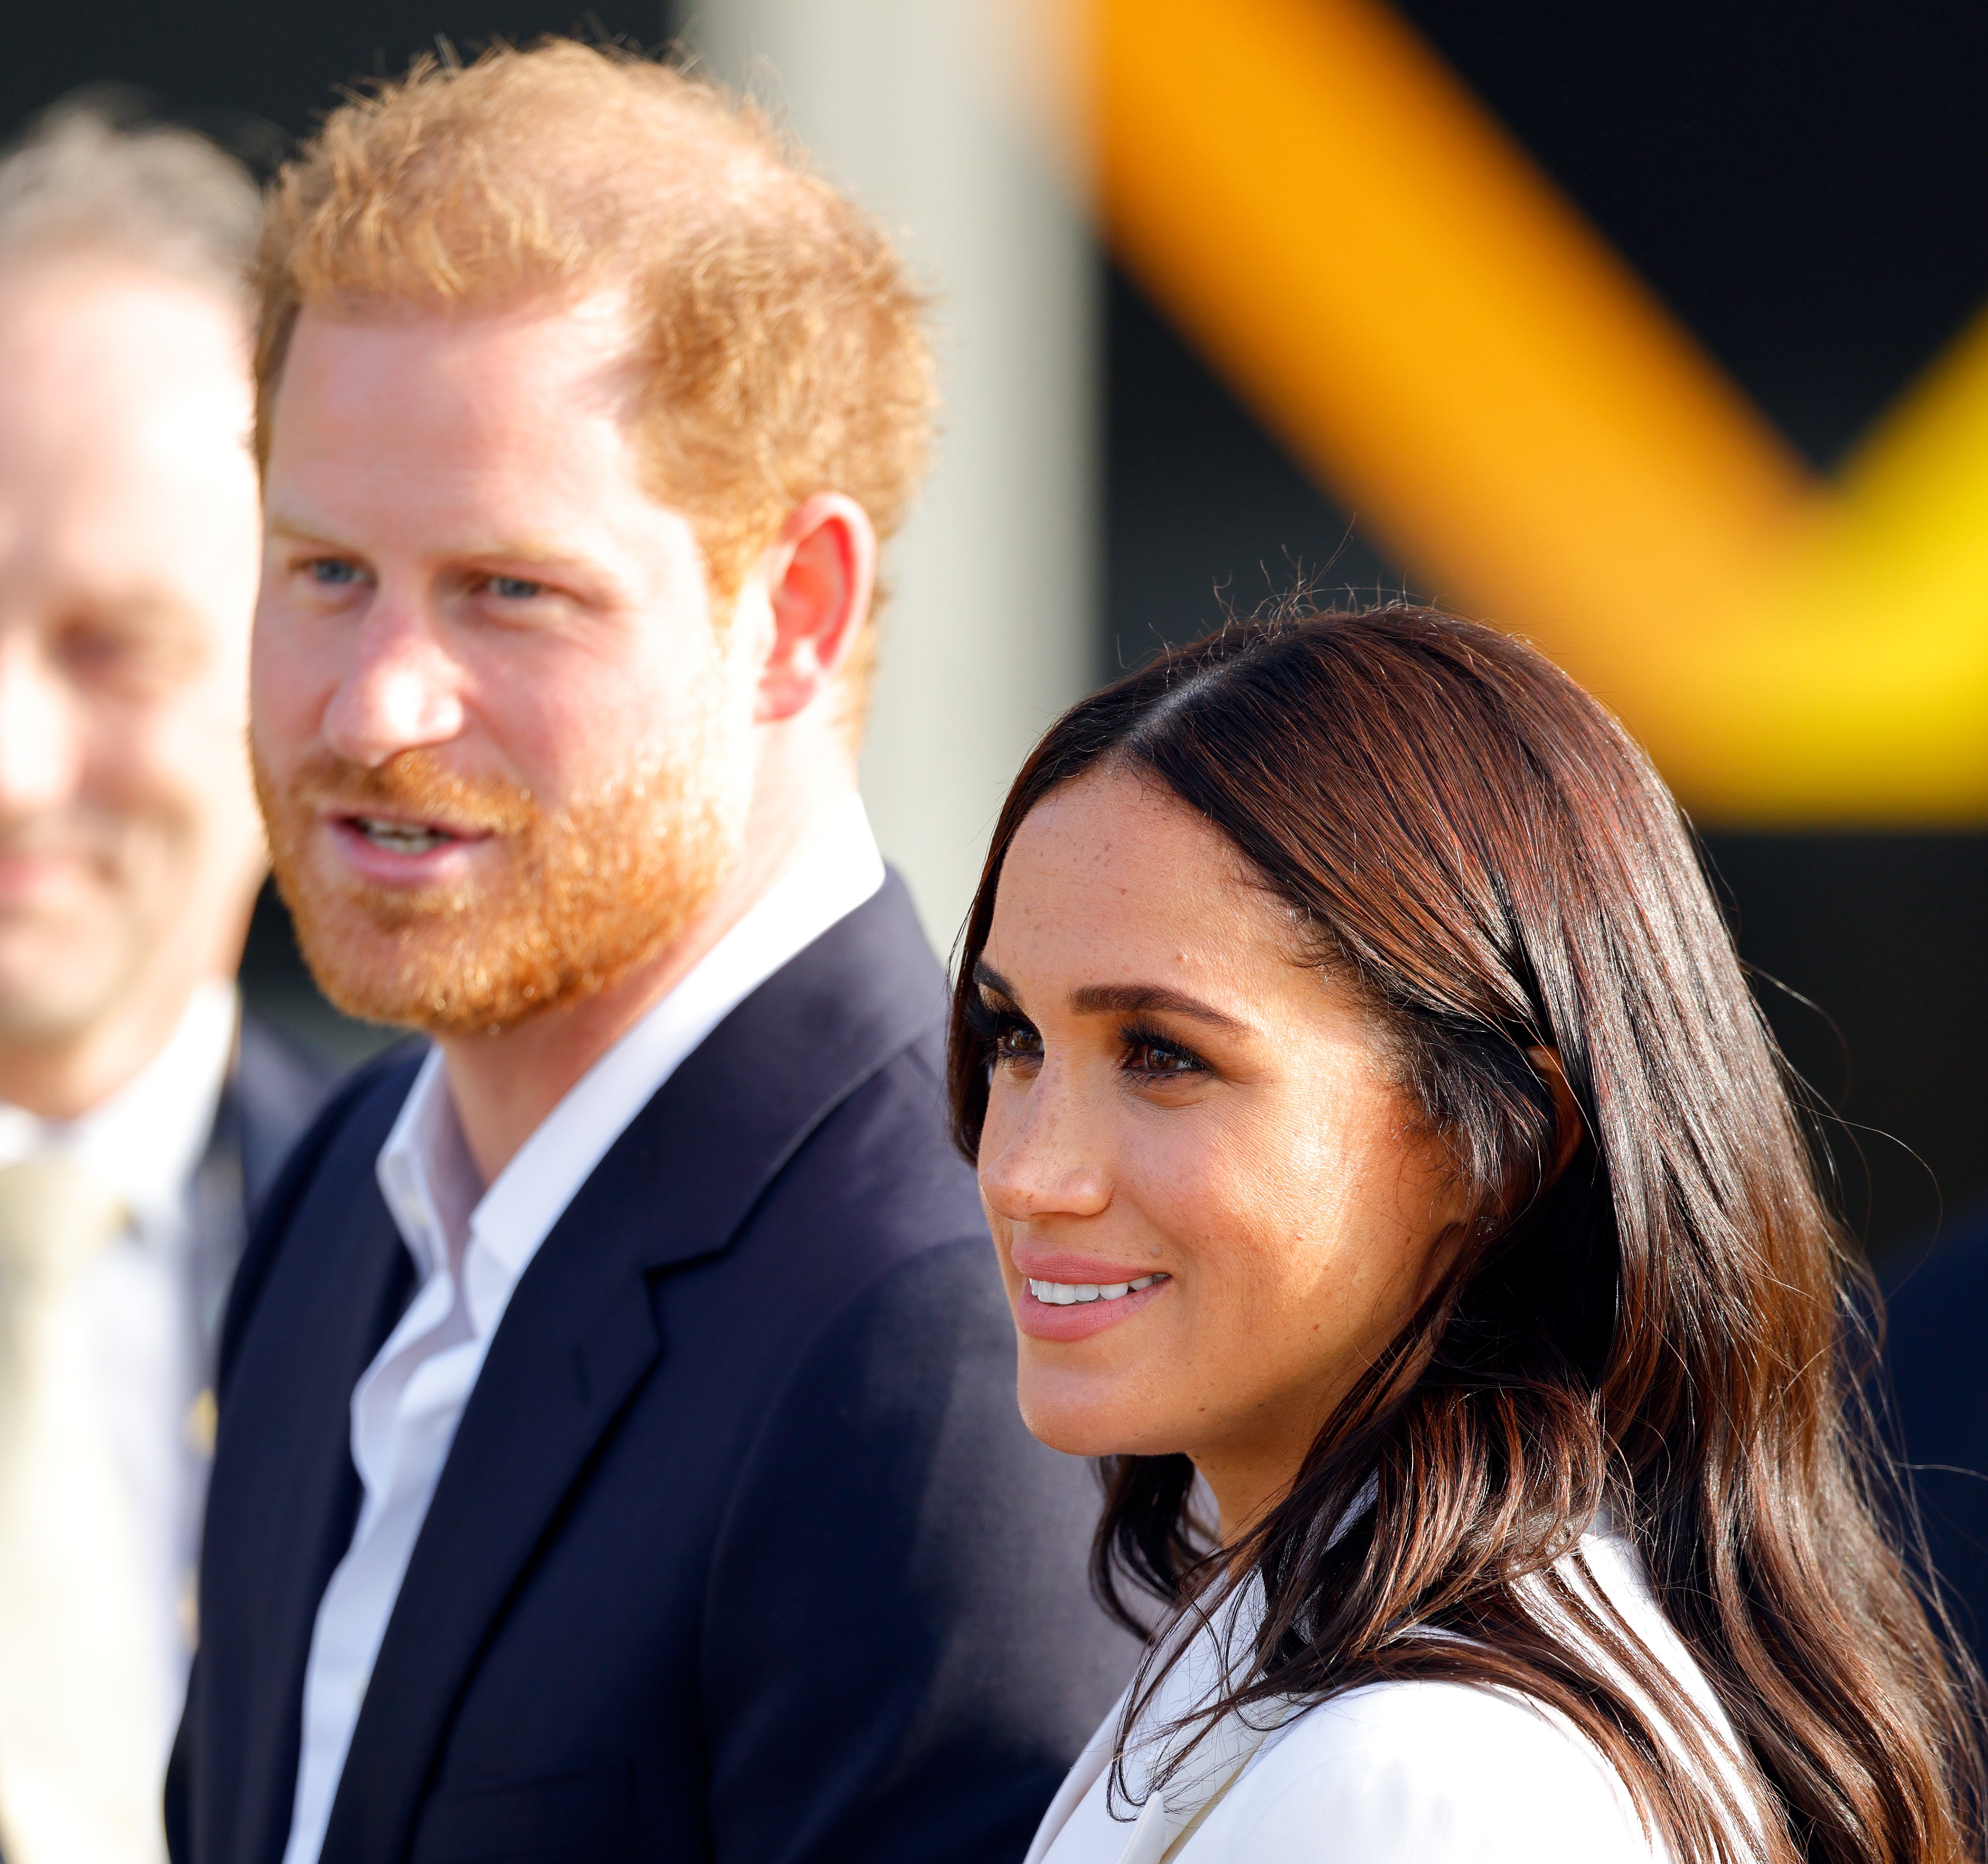 Prince Harry and Meghan Markle attending an Invictus Games Friends and Family reception at Zuiderpark on April 15, 2022 in The Hague, Netherlands. | Source: Getty Images